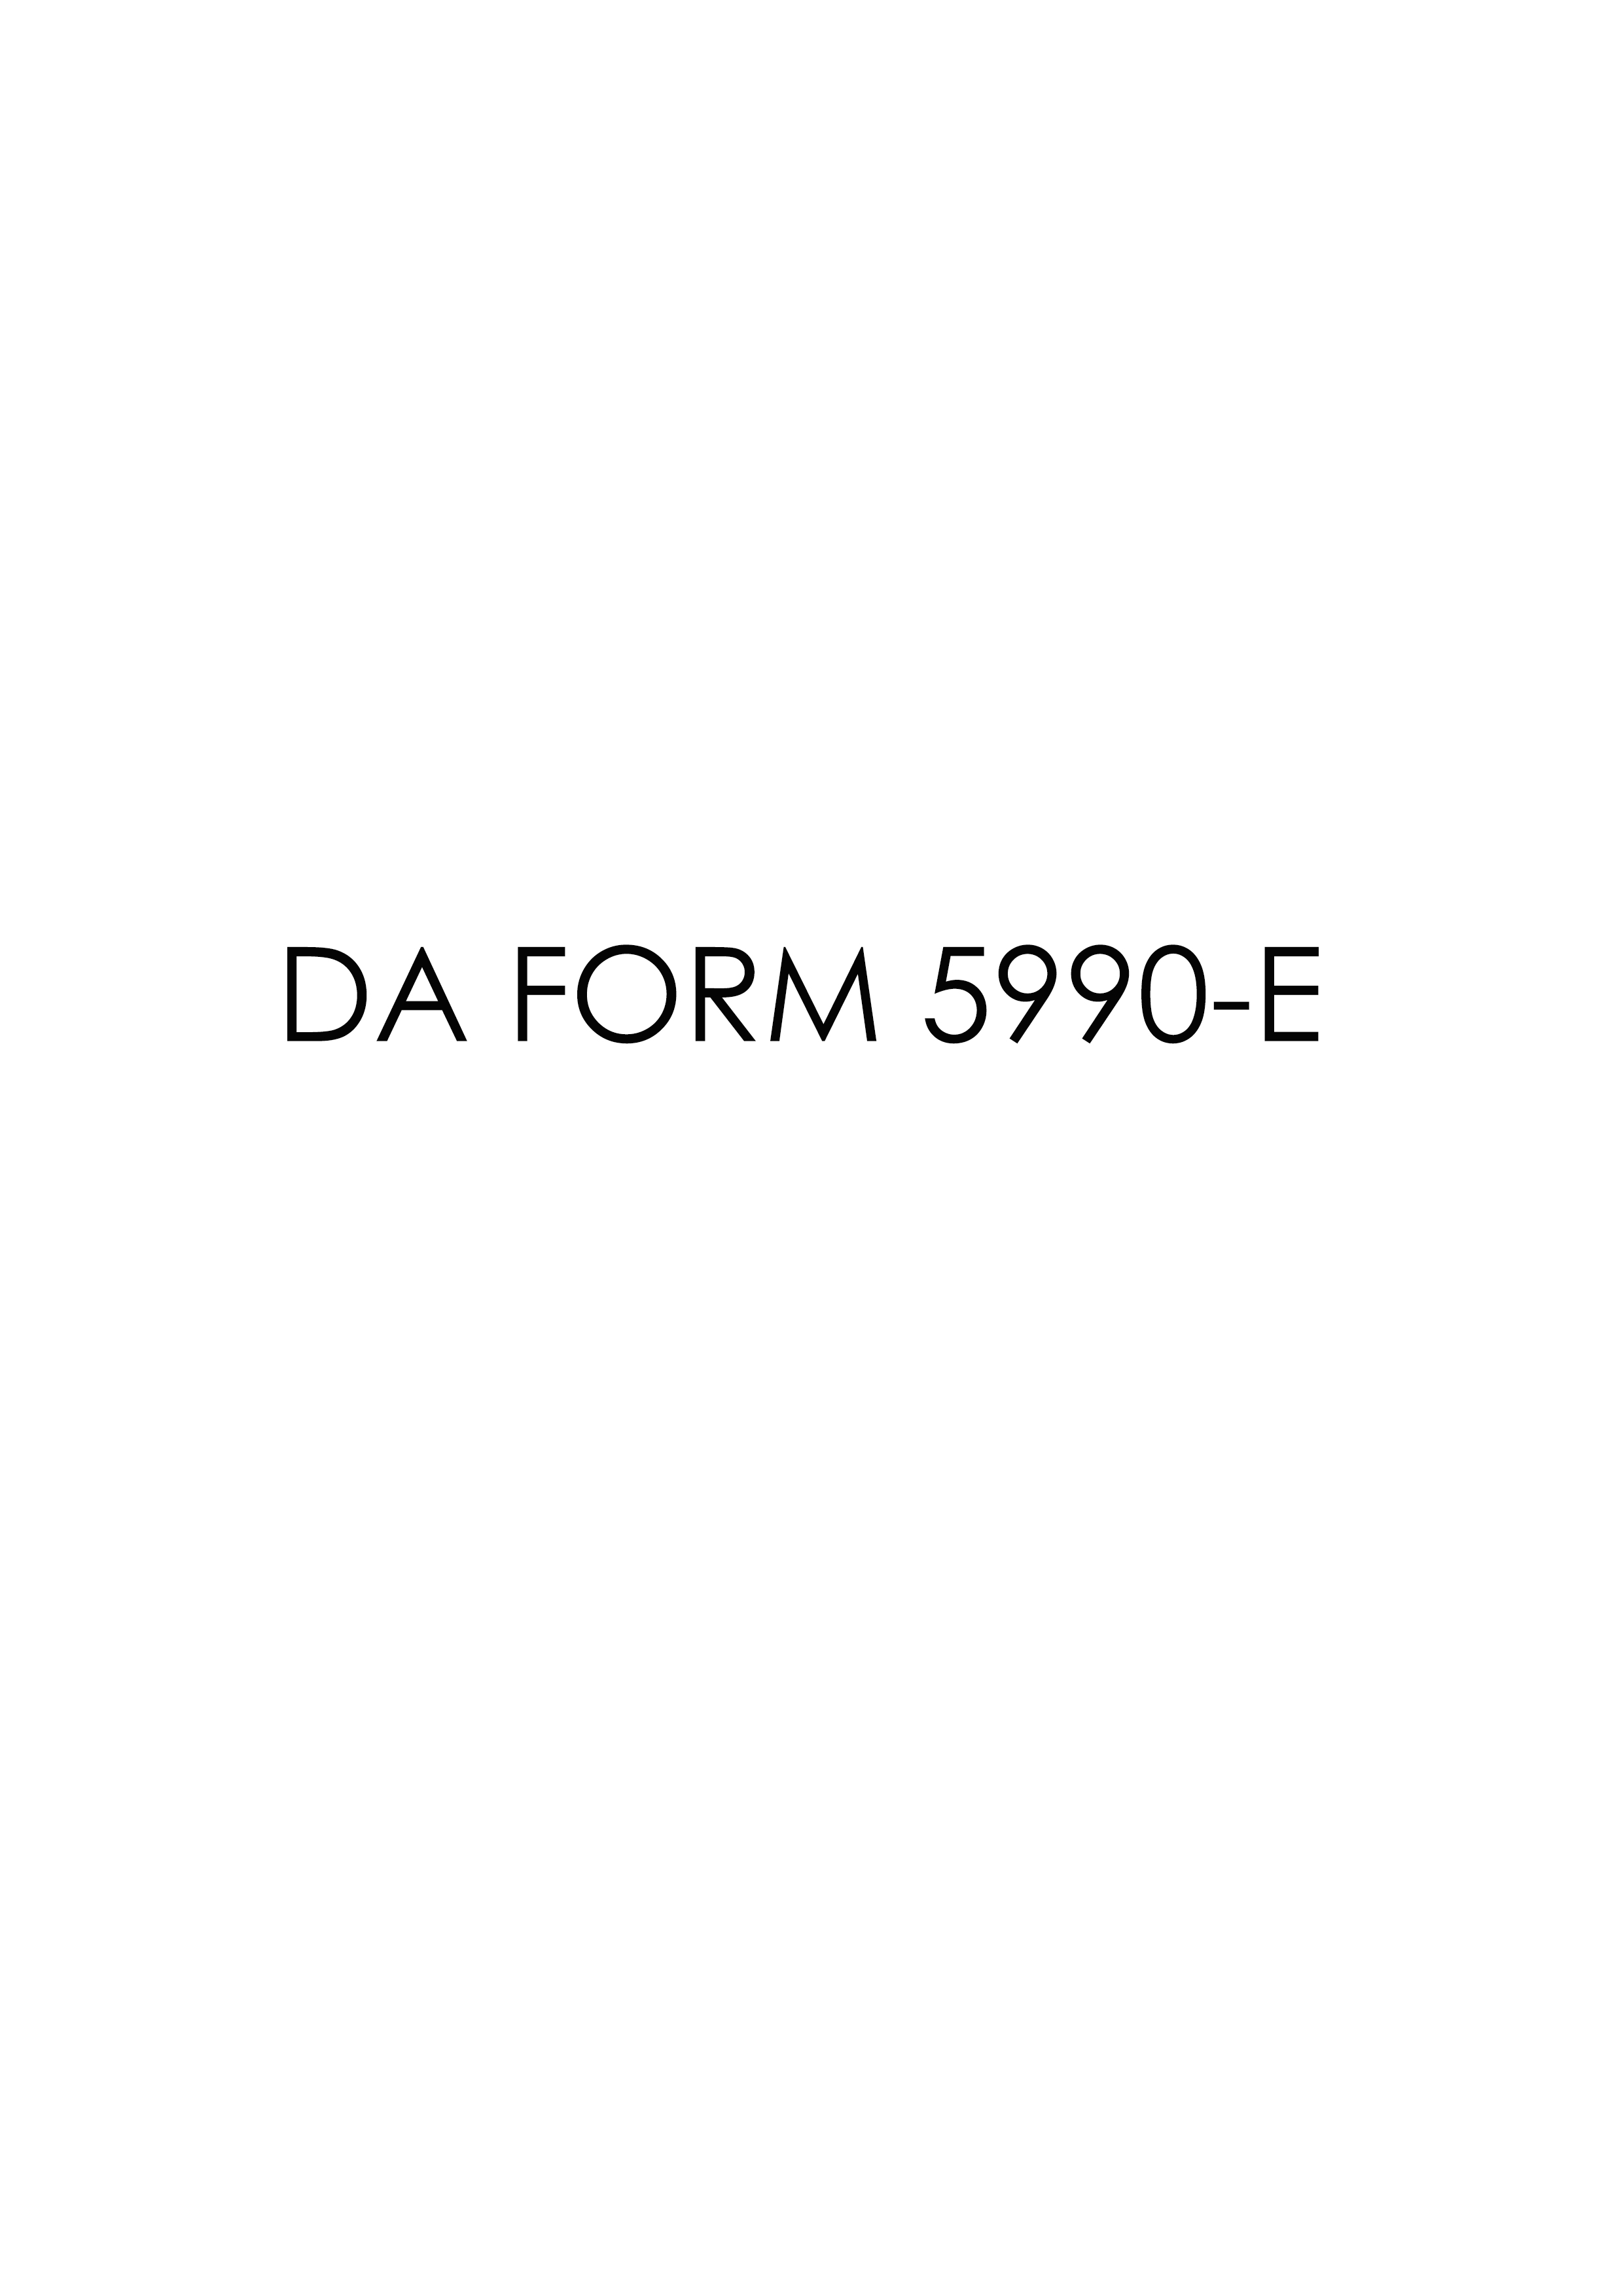 Download Fillable Da Form 5990 E Army Myservicesupport Com